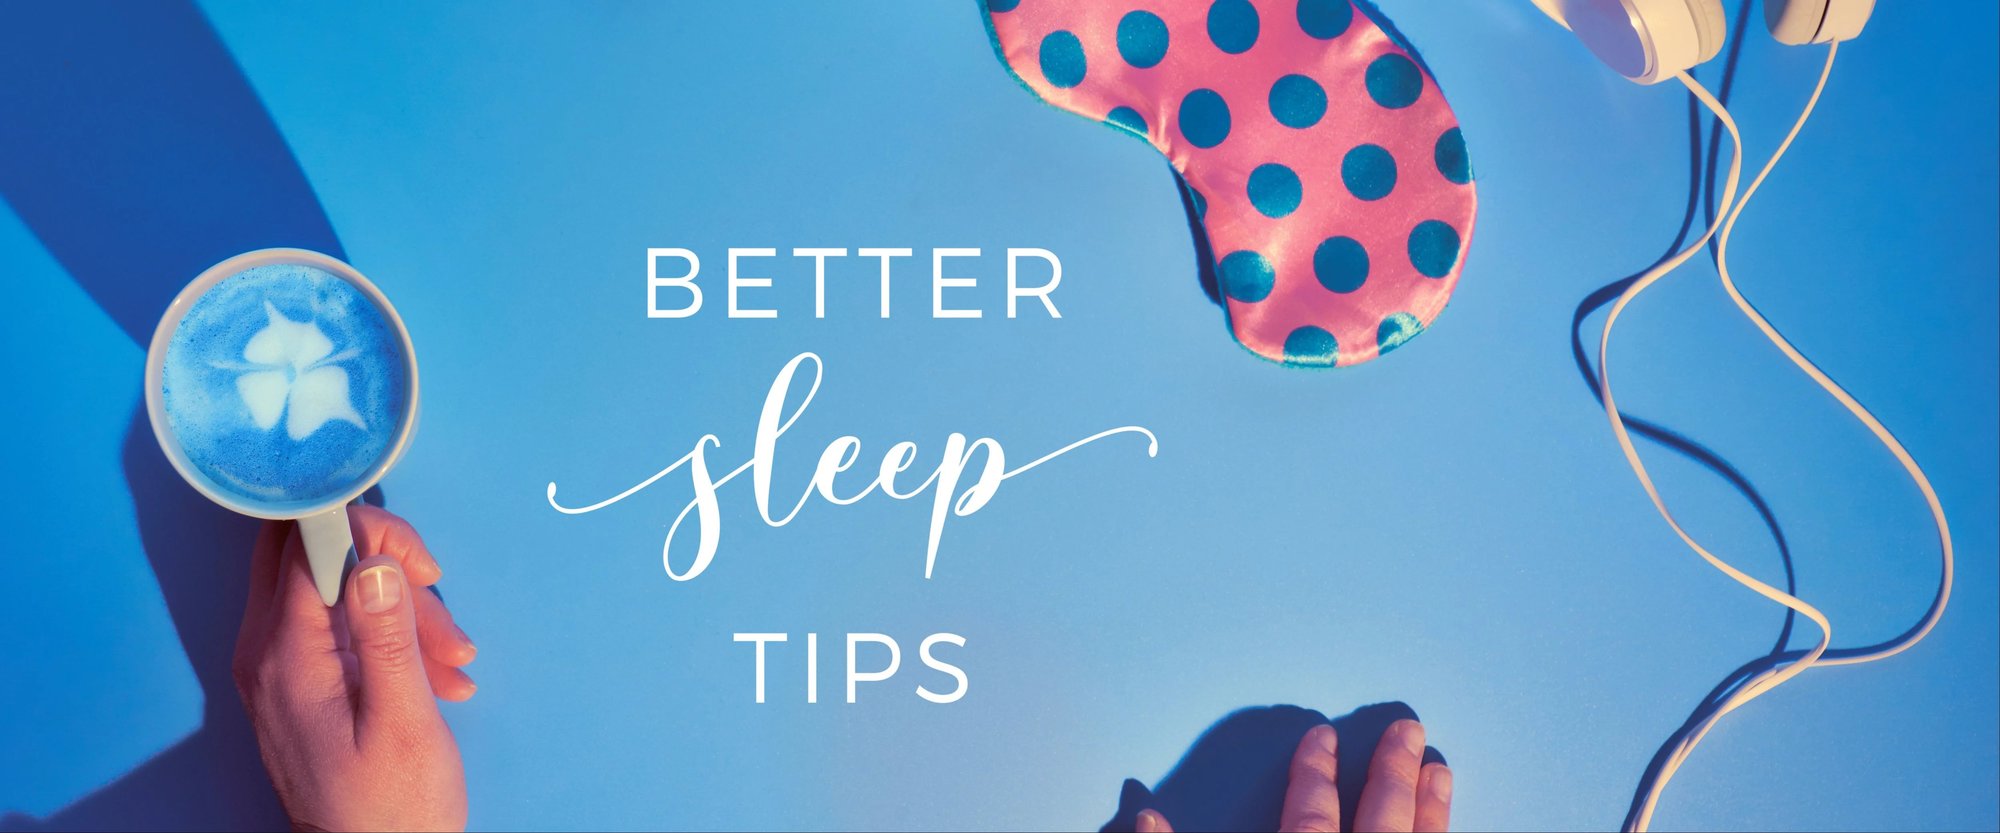 Blue background with a sleep mask, headphones, cup of tea, and text reading "better sleep tips"